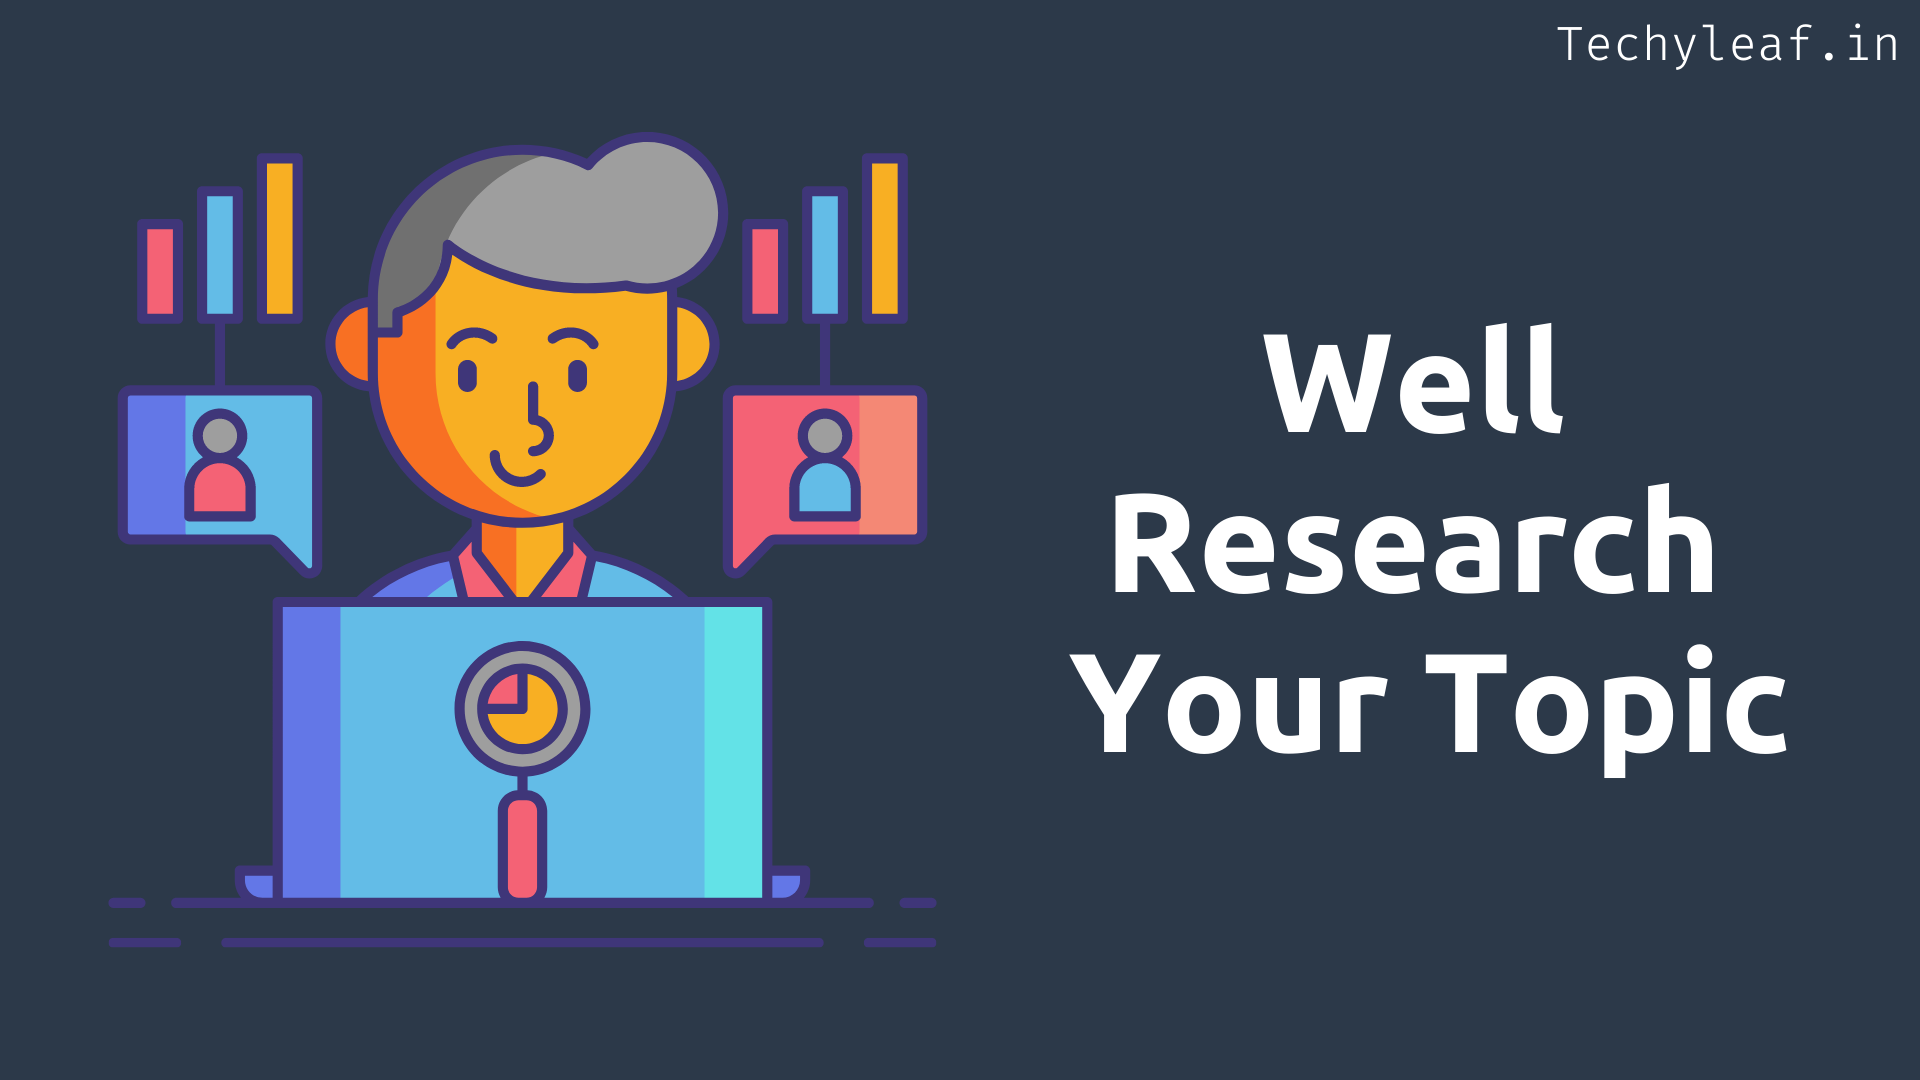 Well-Research Your Topic